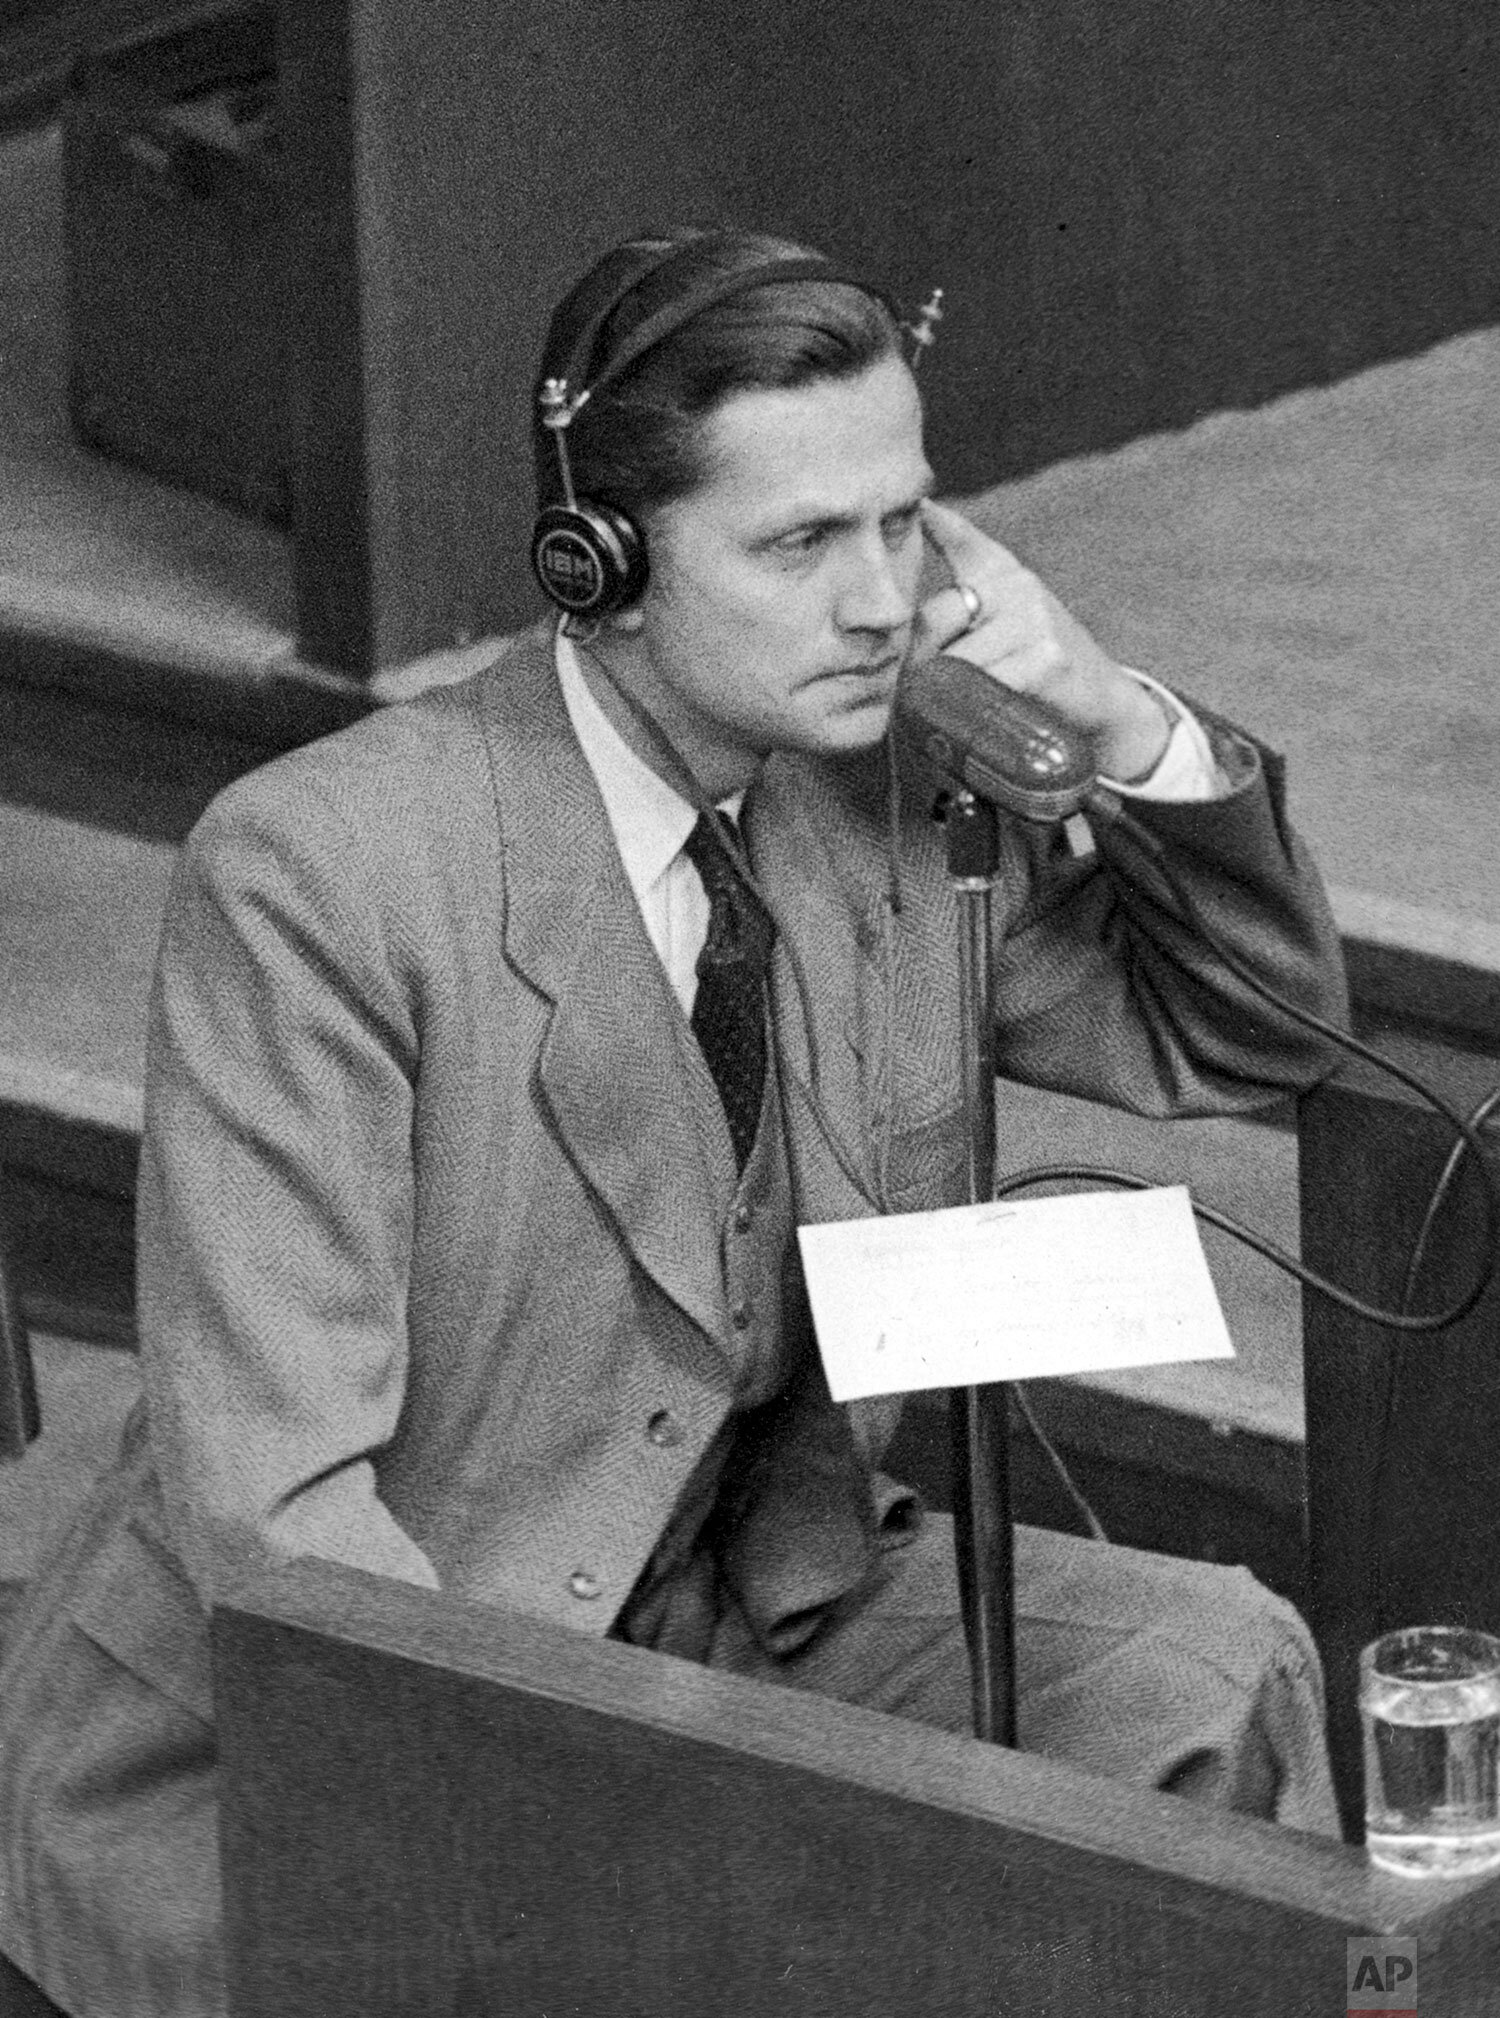  Former German Nazi SS-Brigadefuehrer and former head of foreign intelligence Walter Schellenberg is seen in the witness box on January 4, 1946 in Nuremberg, Germany during the war crime trials whilst giving evidence. (AP Photo/Eddie Worth) 